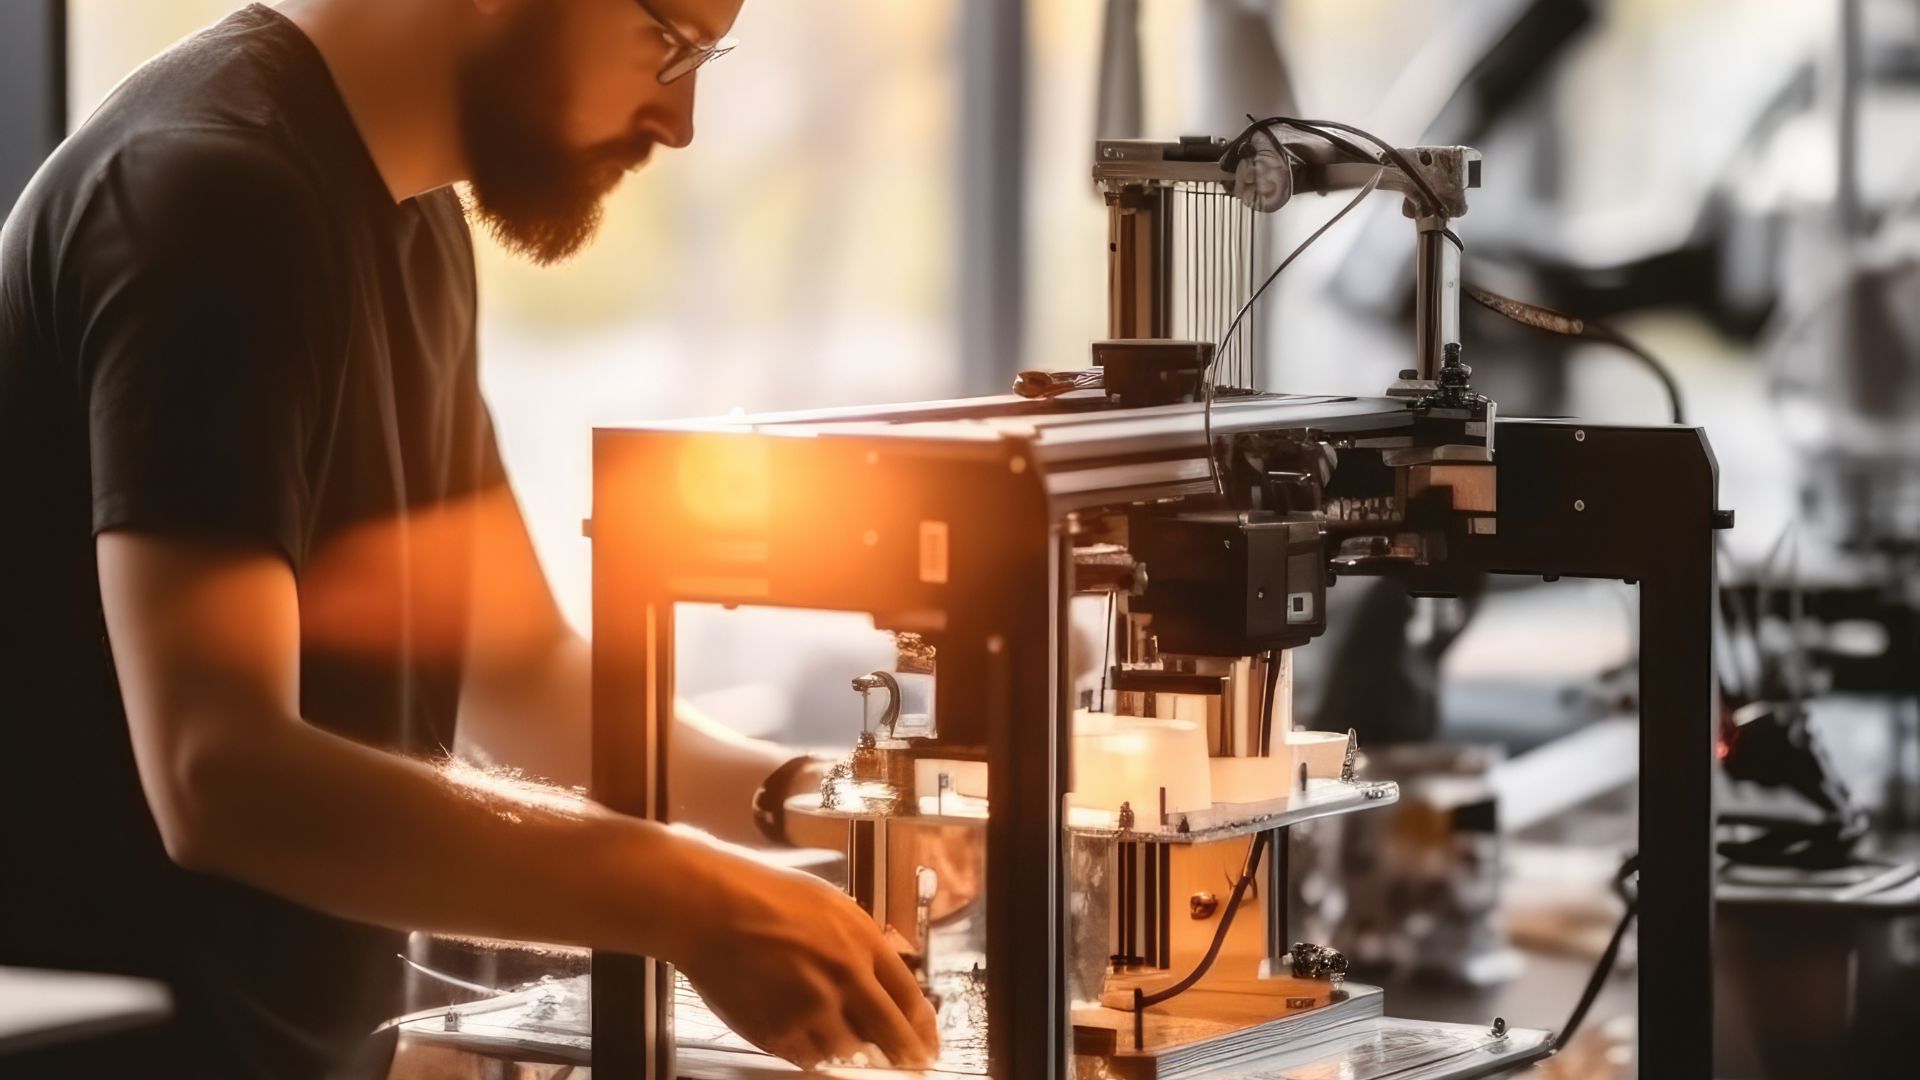 How Are Desktop and Professional 3D Printers Different?